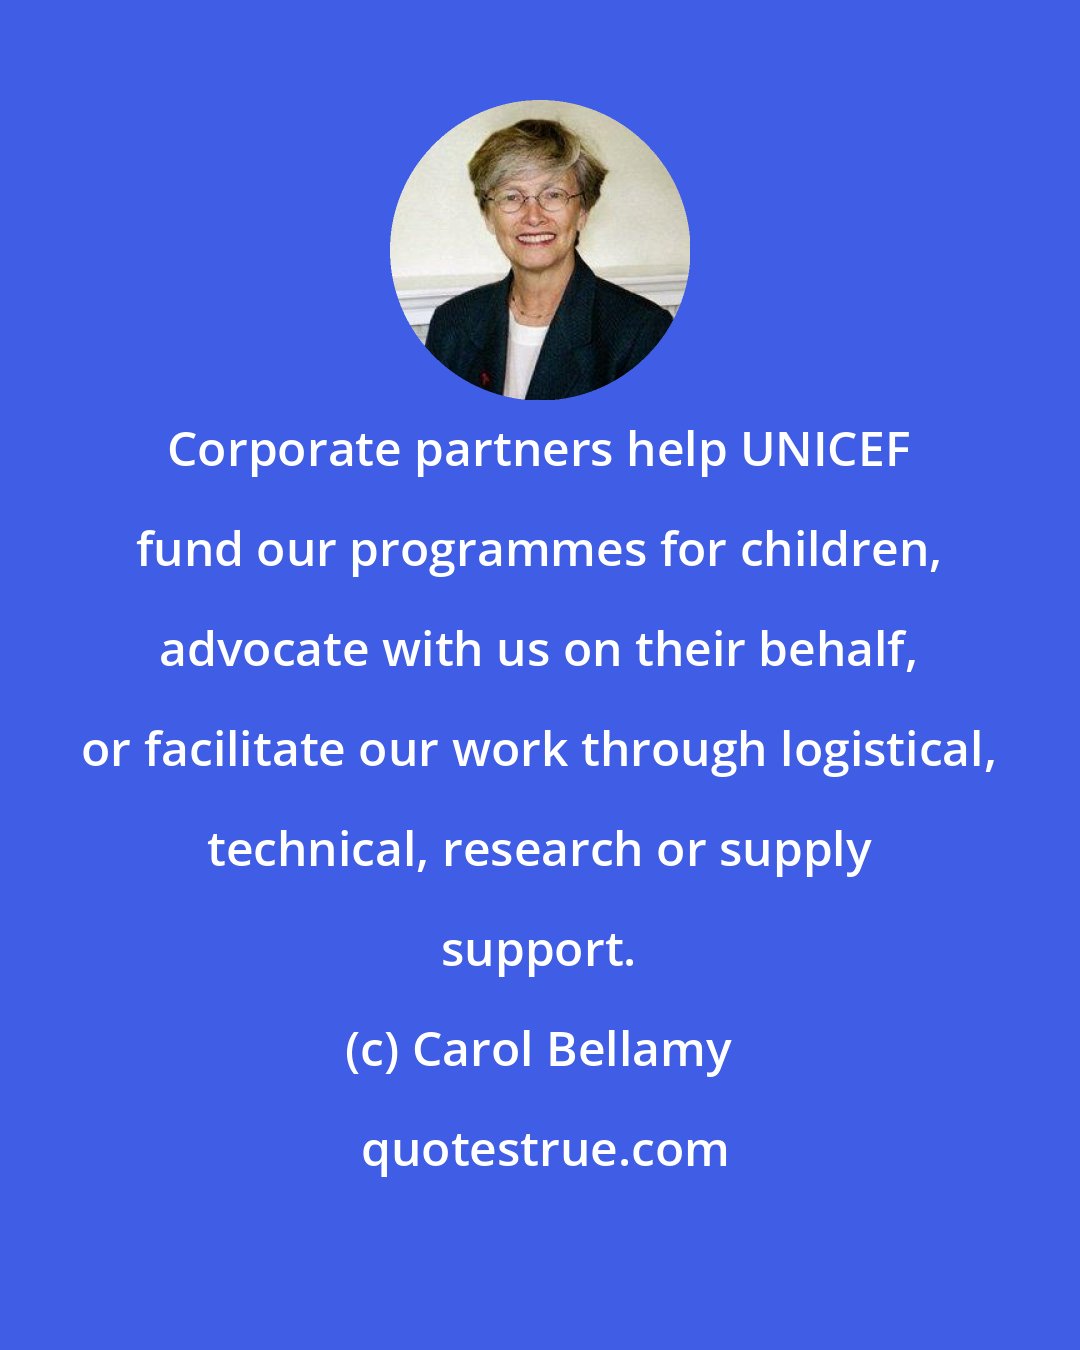 Carol Bellamy: Corporate partners help UNICEF fund our programmes for children, advocate with us on their behalf, or facilitate our work through logistical, technical, research or supply support.